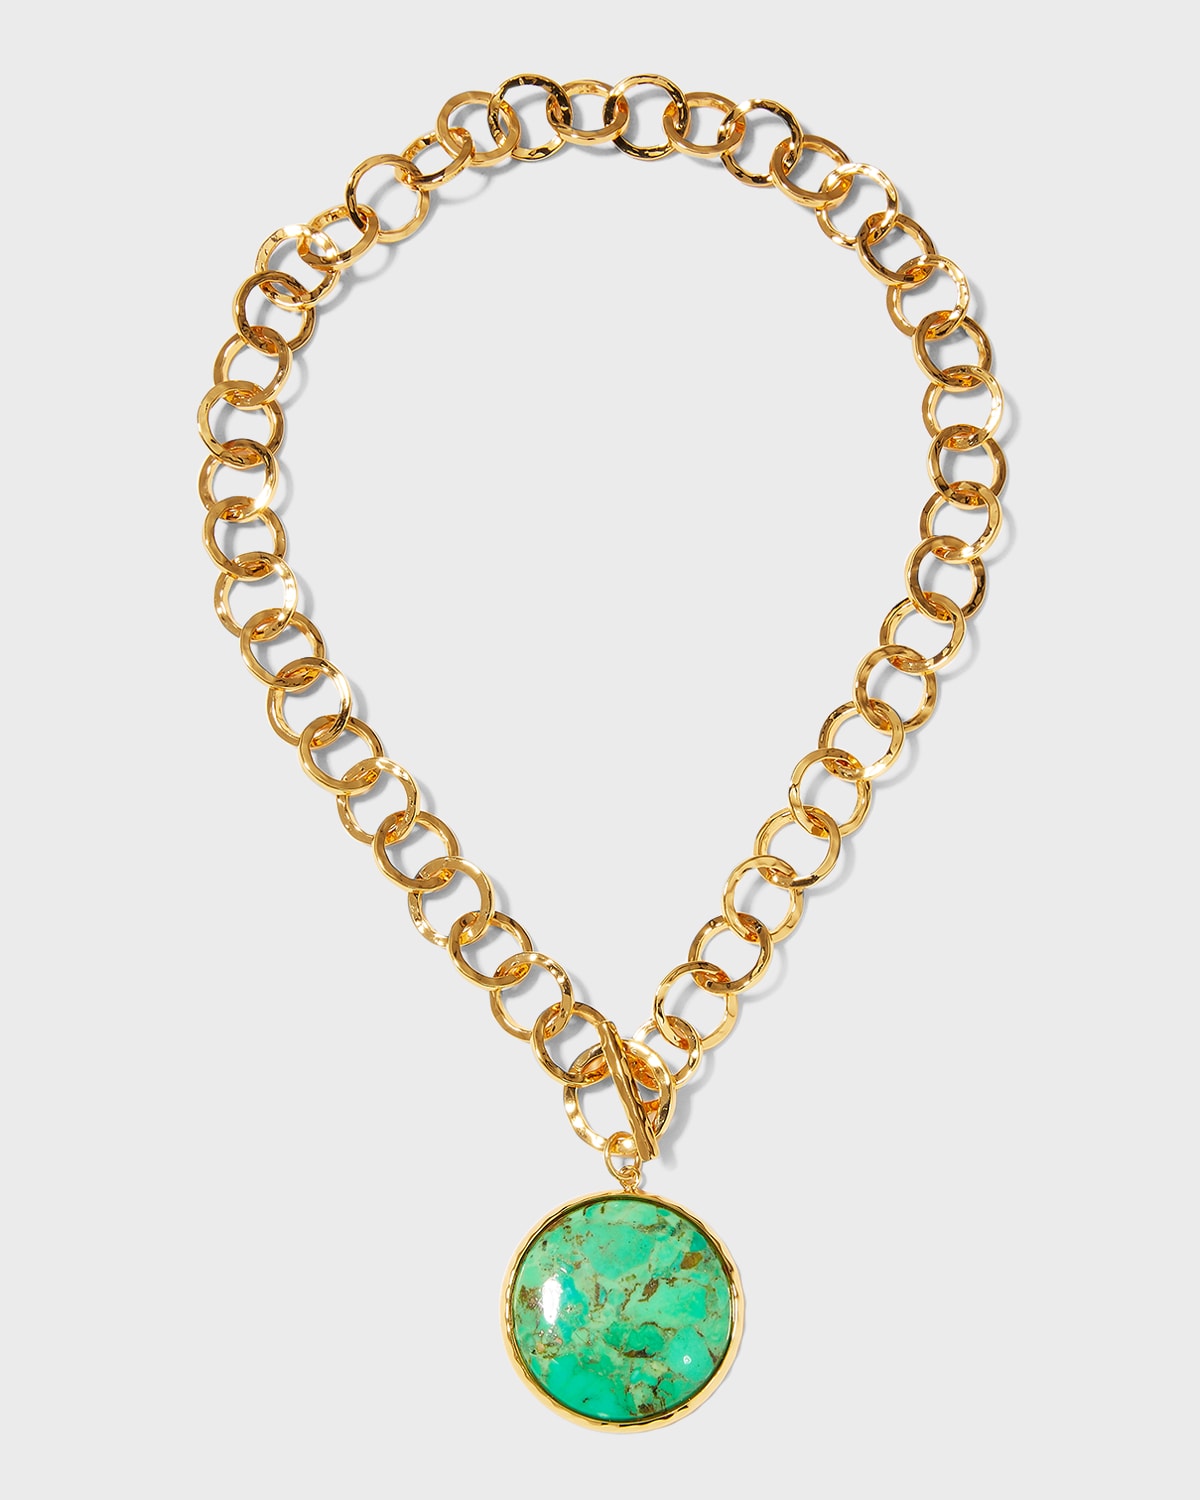 NEST Jewelry Green Turquoise Heart Charm Necklace | Neiman Marcus